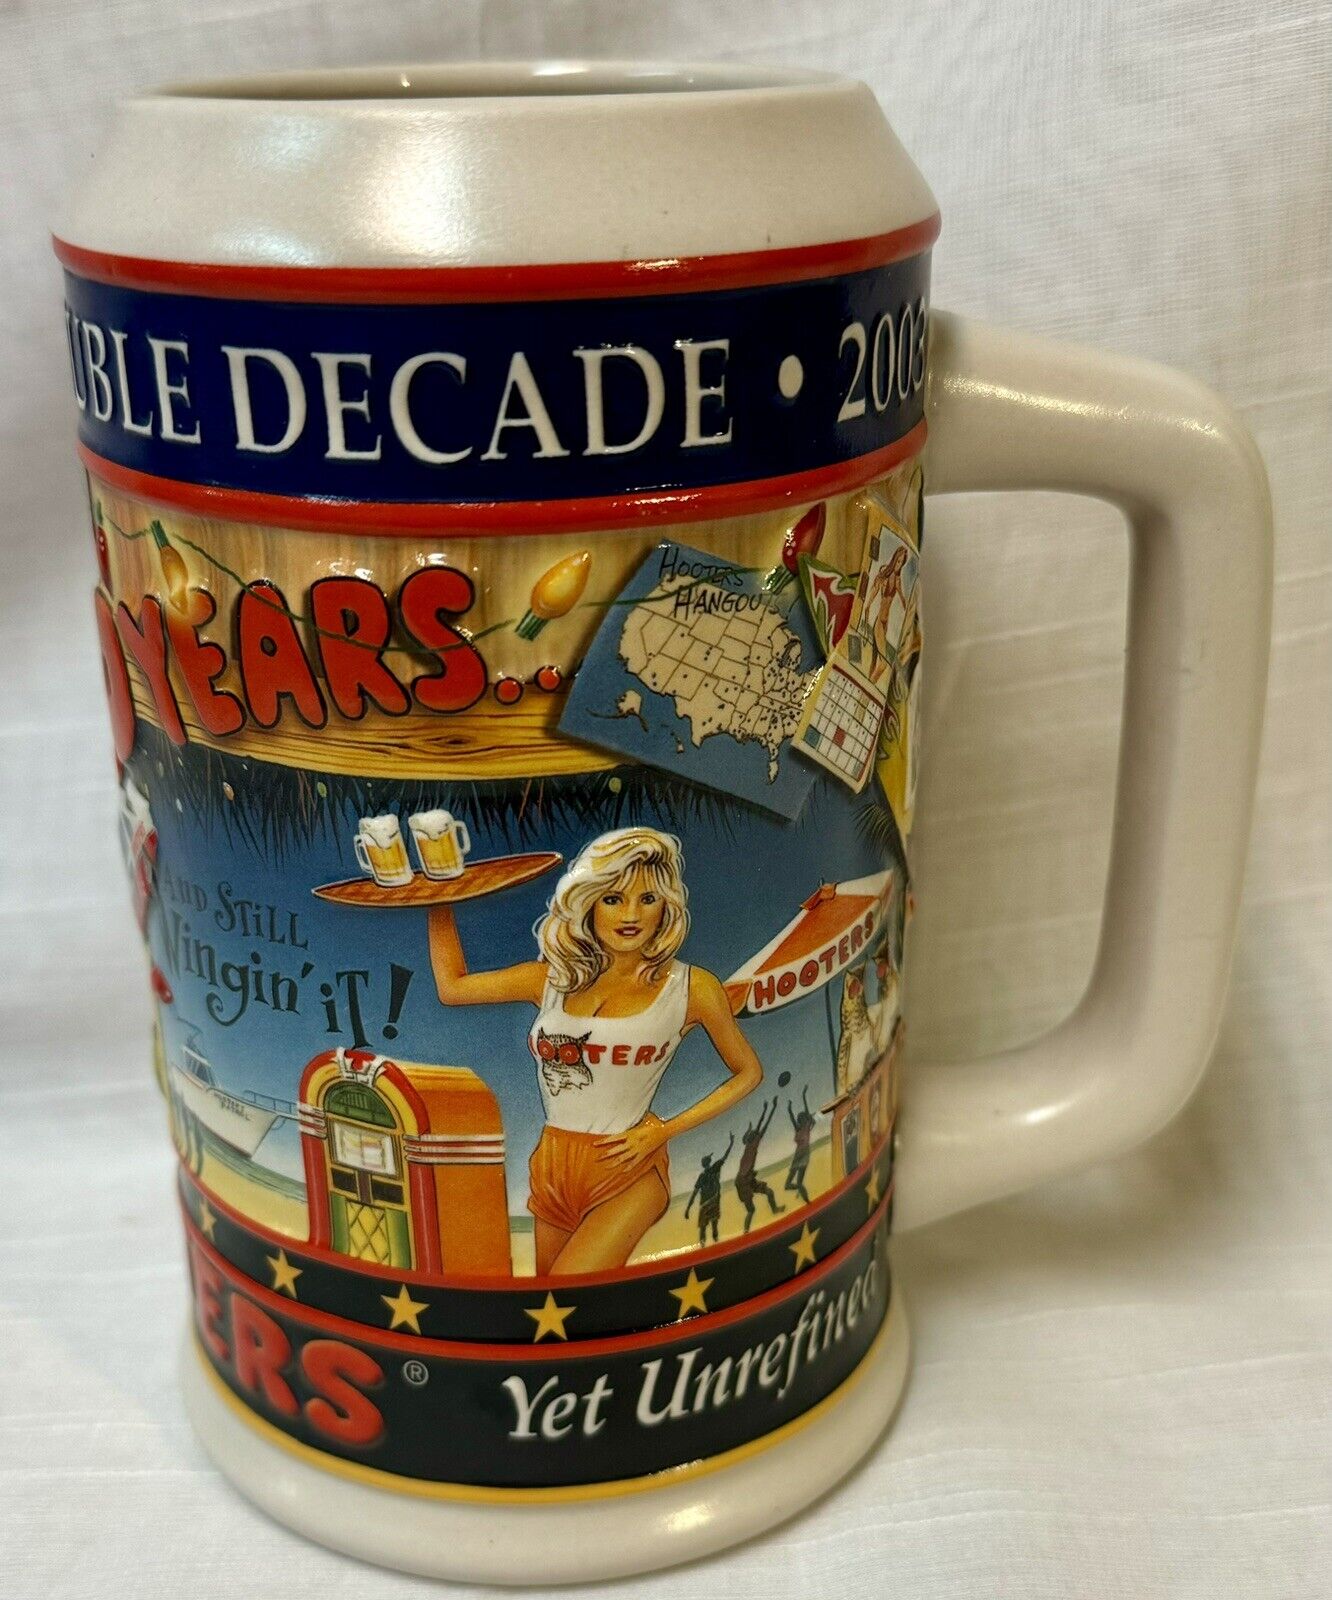 HOOTERS 1983-2003 Delightfully Double Decade, Limited Brazil Embossed Mug